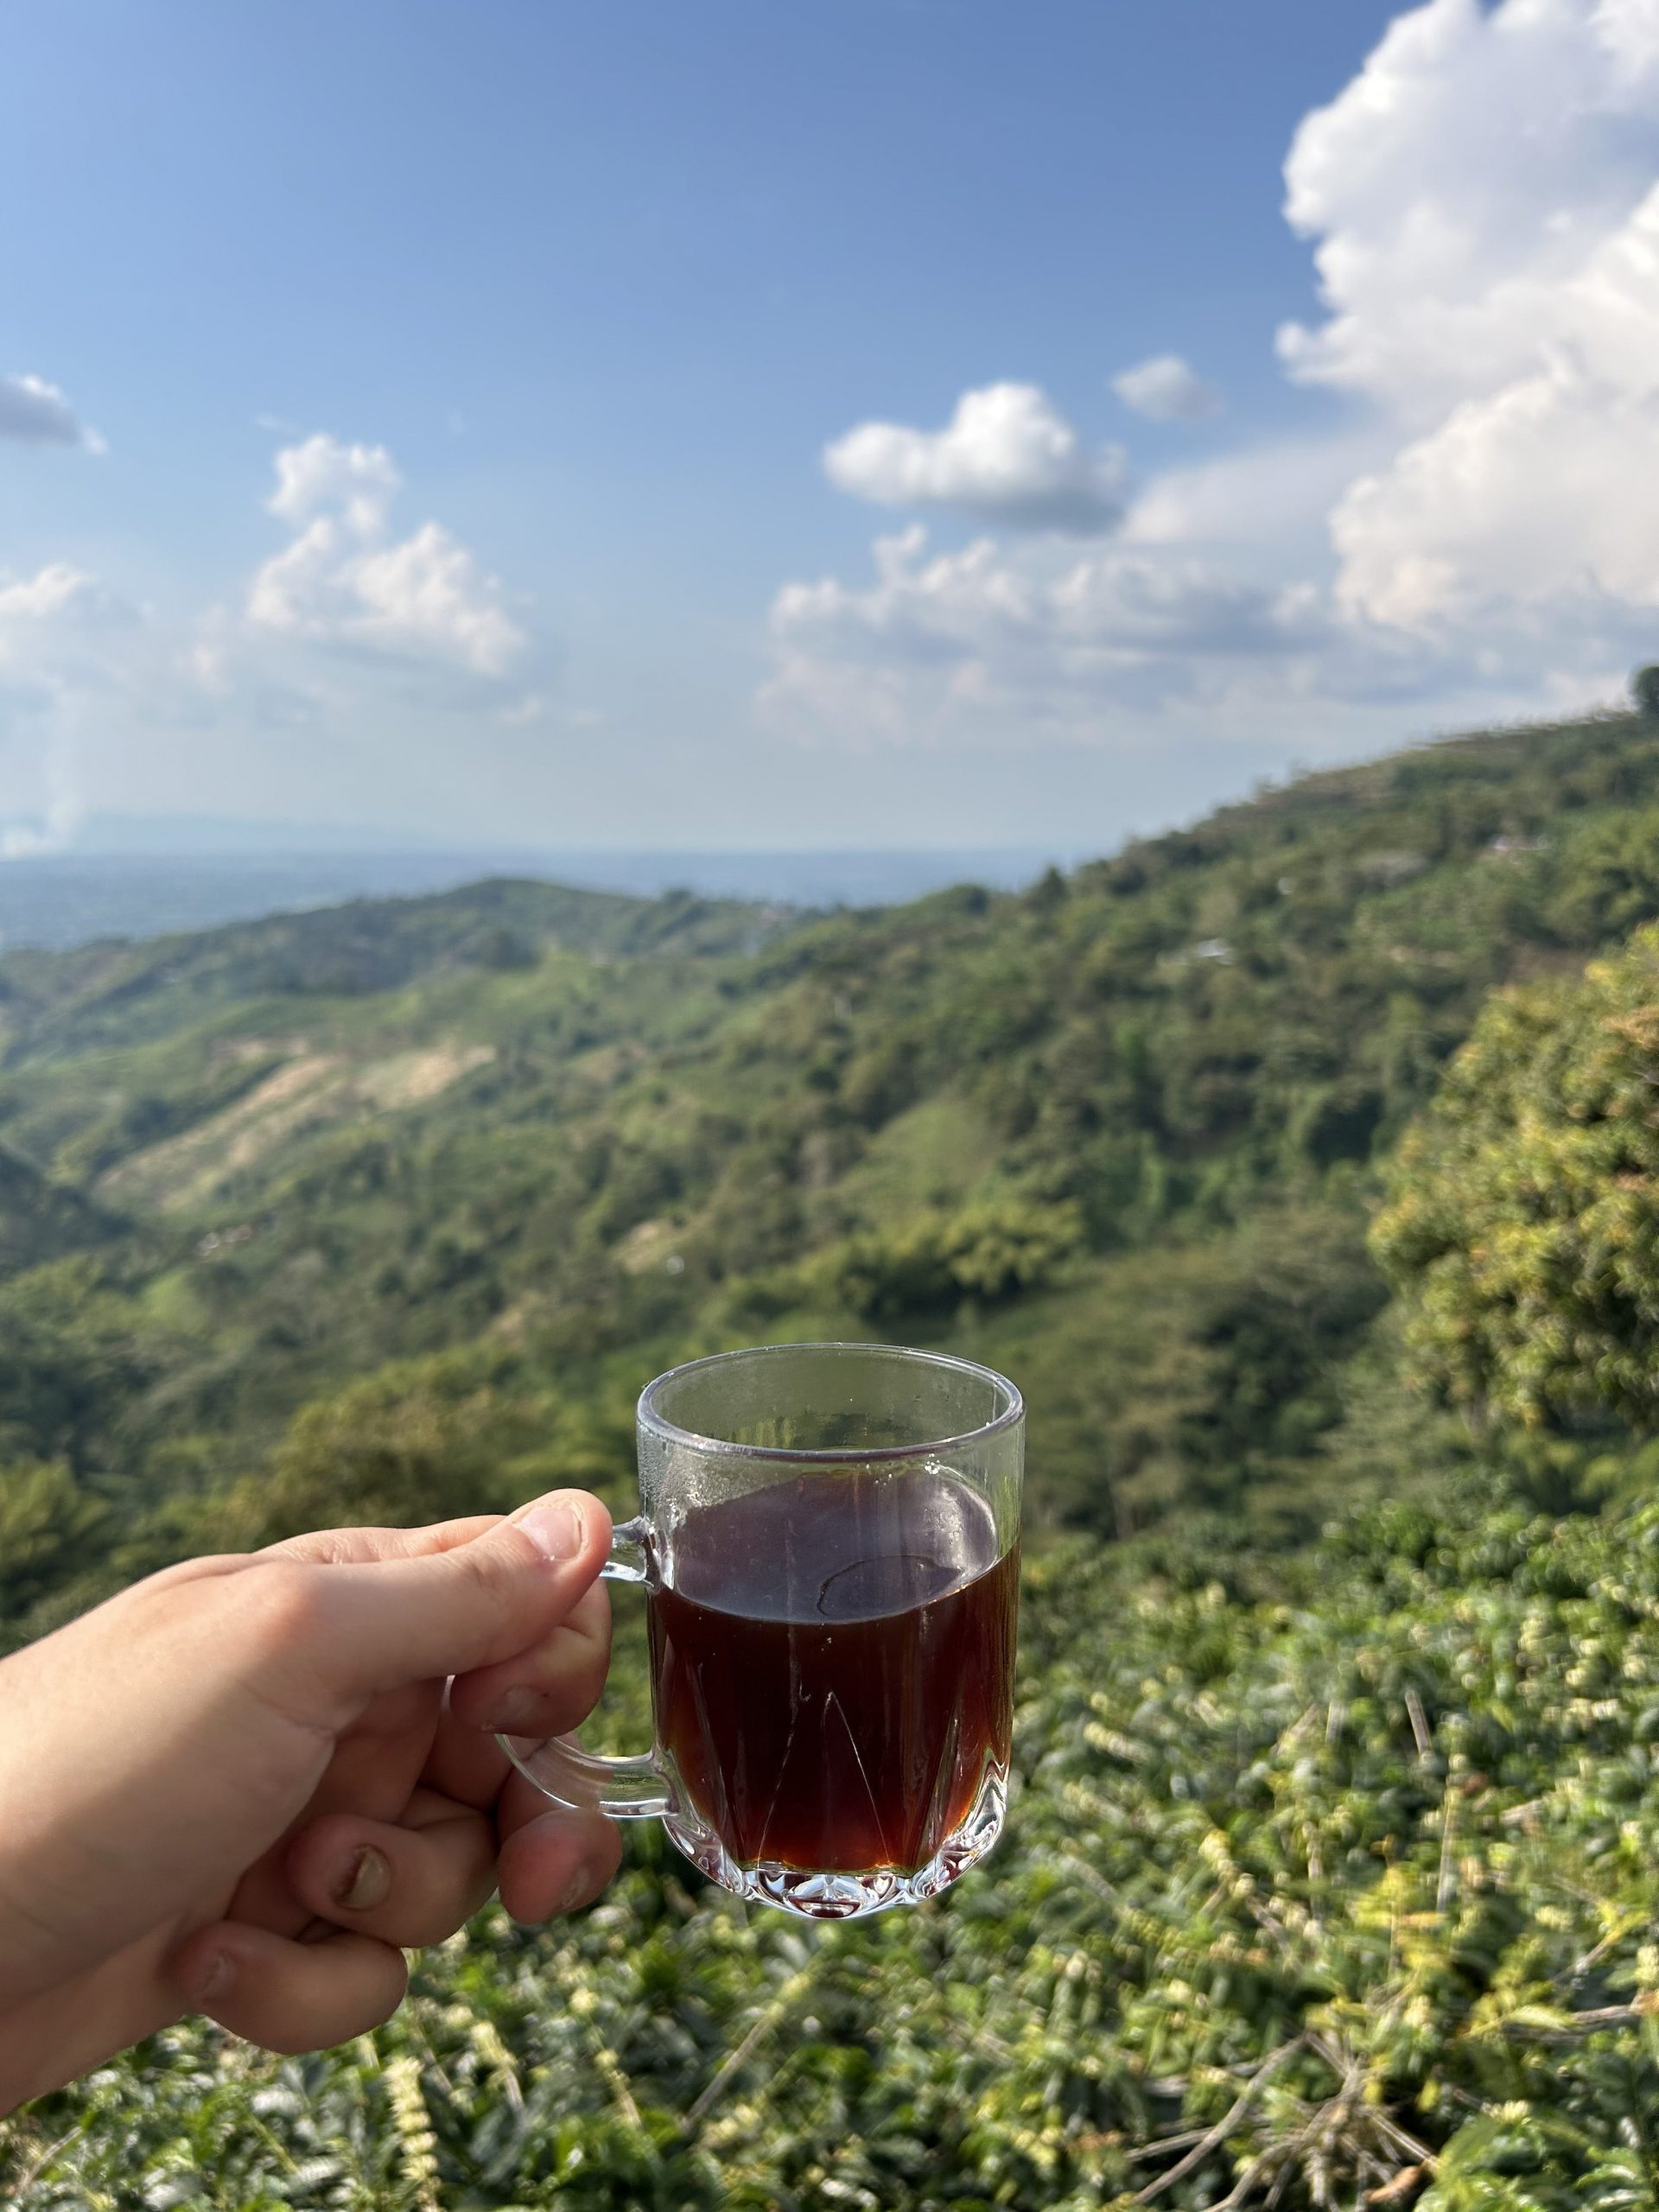 A freshly made cup of coffee with a view